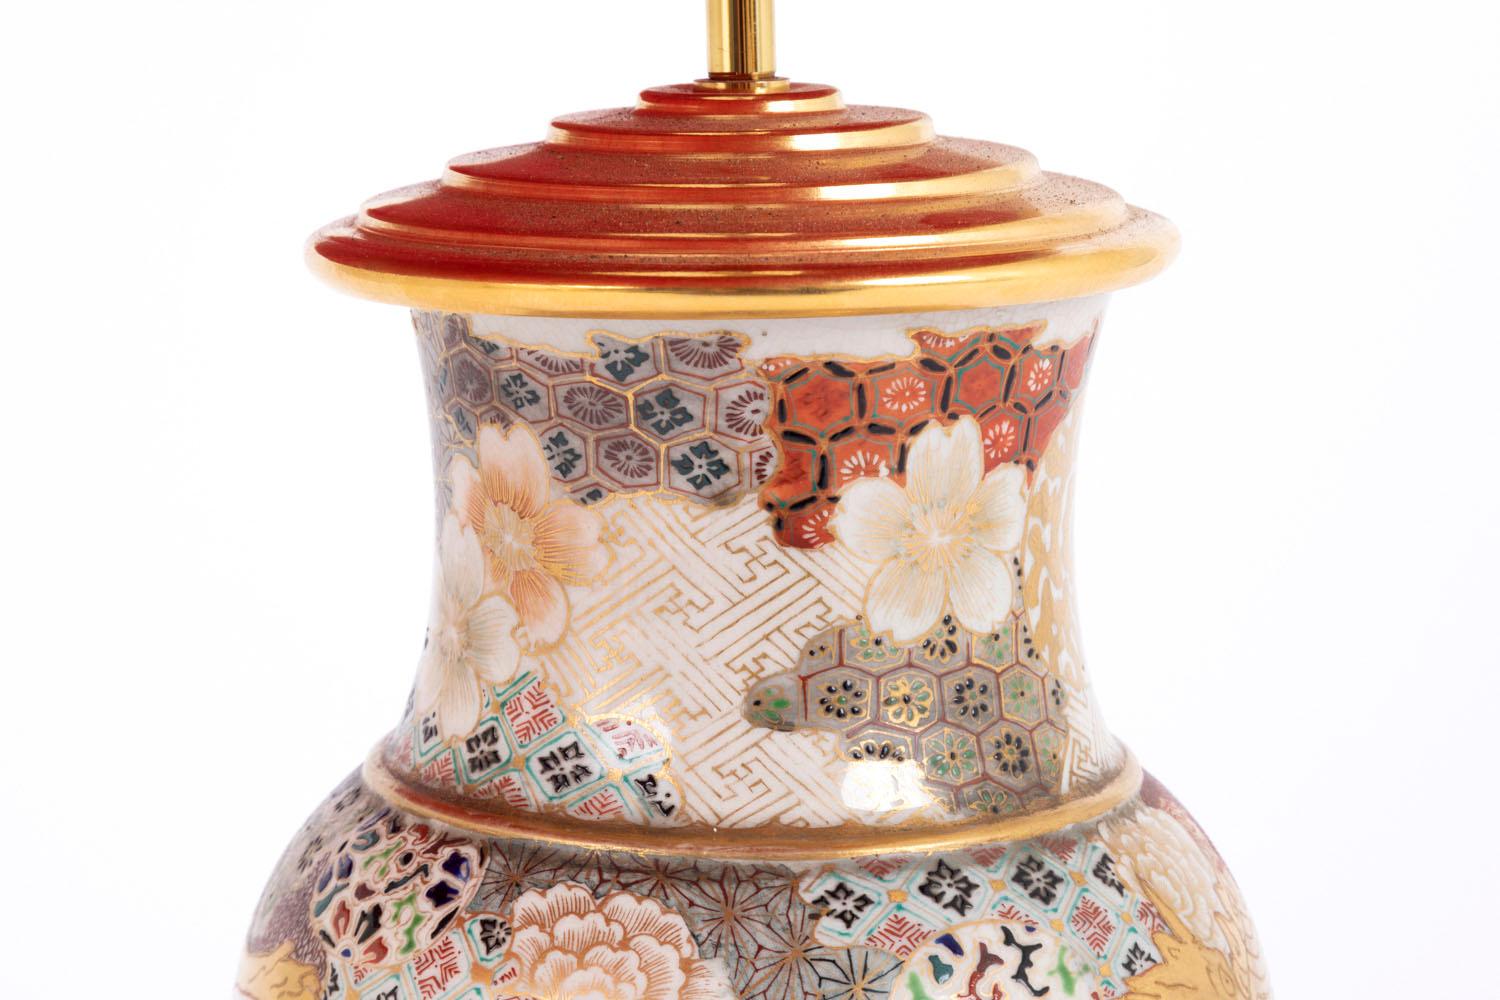 Chinese Export Satsuma Earthenware Lamp, Polychrome and Gilt Decor, Last 19th Century